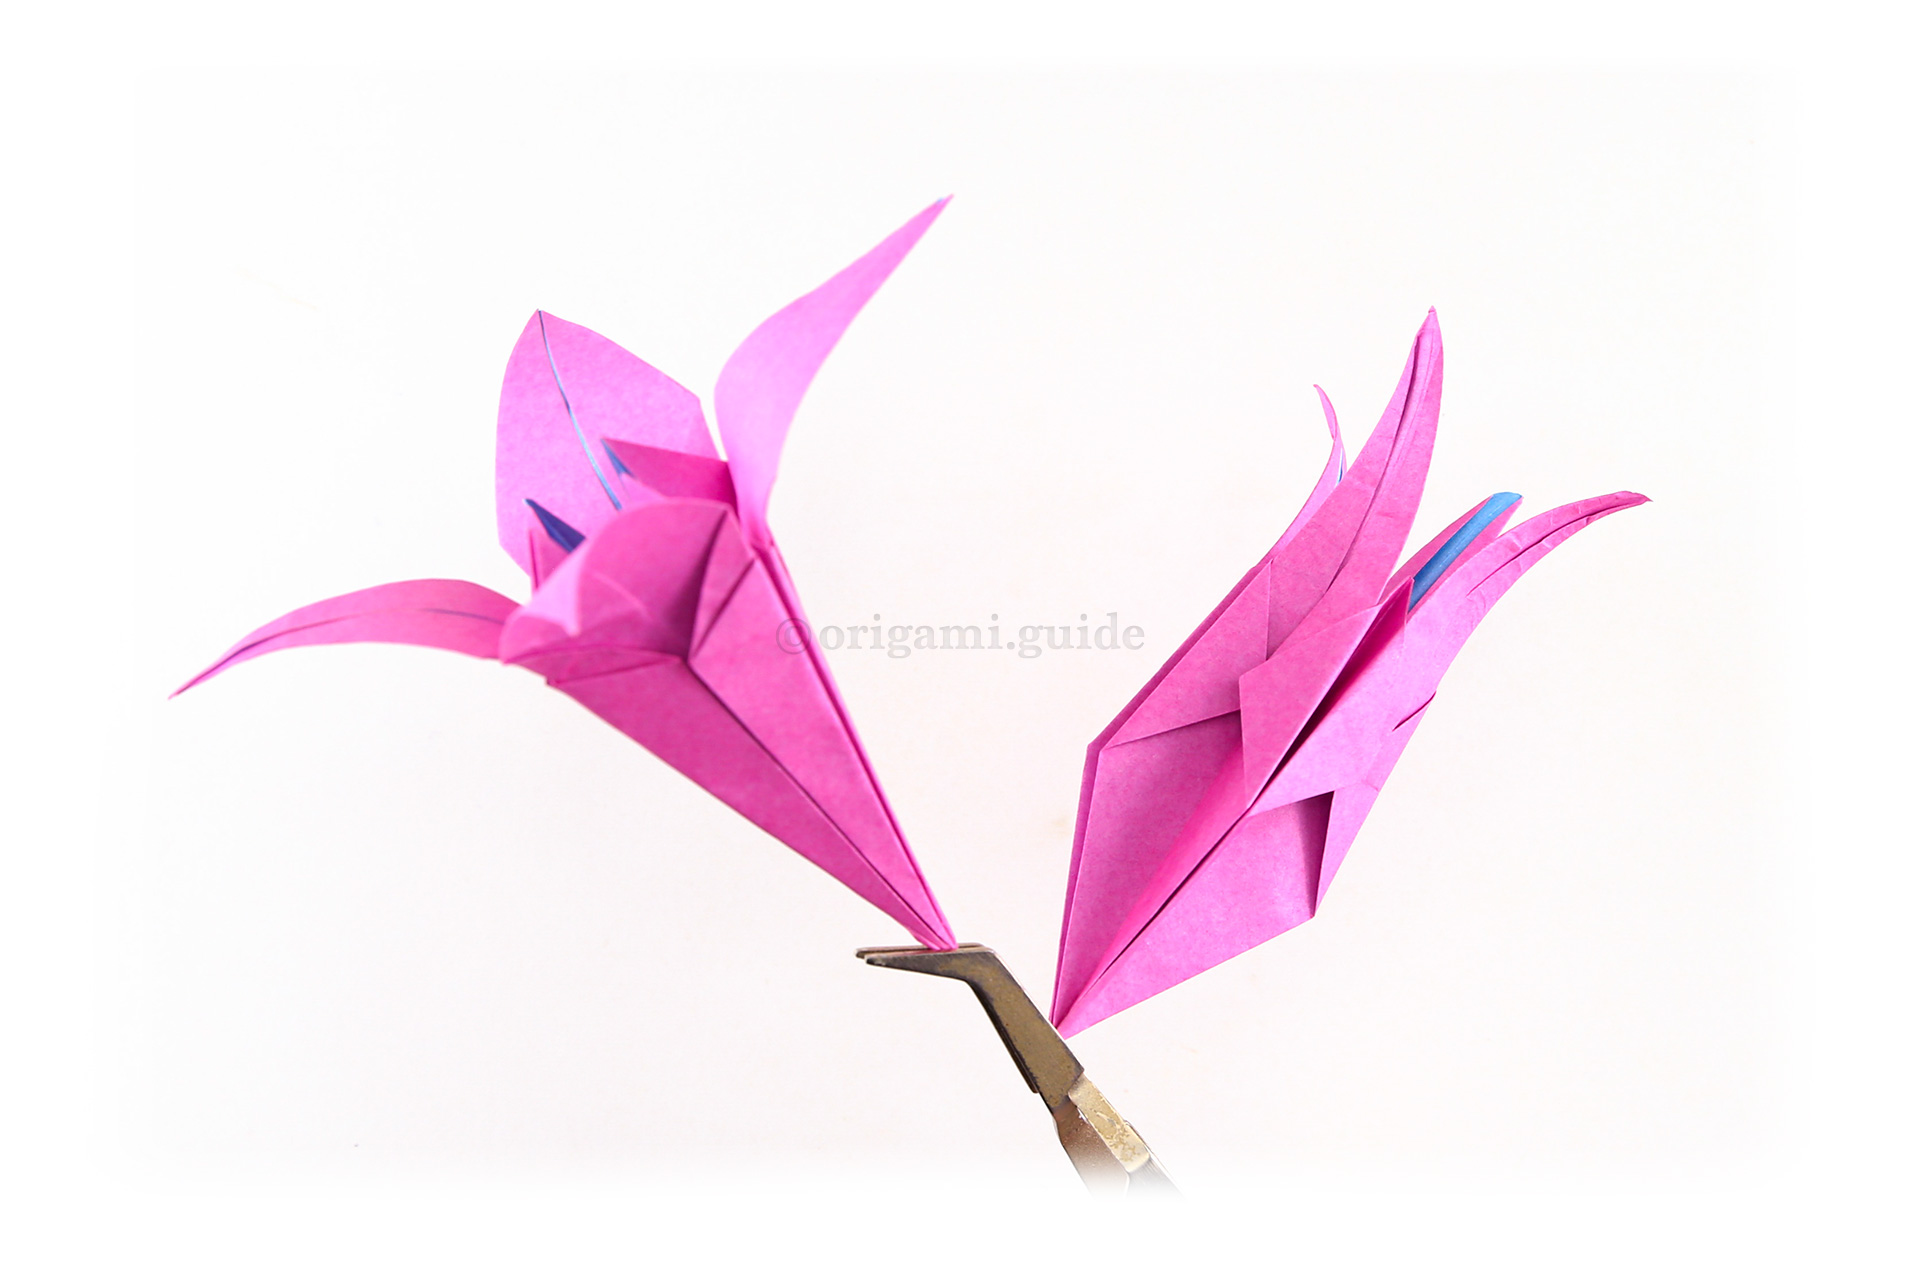 You can attach the lily bud and lily flower on to your stems in this configuration.